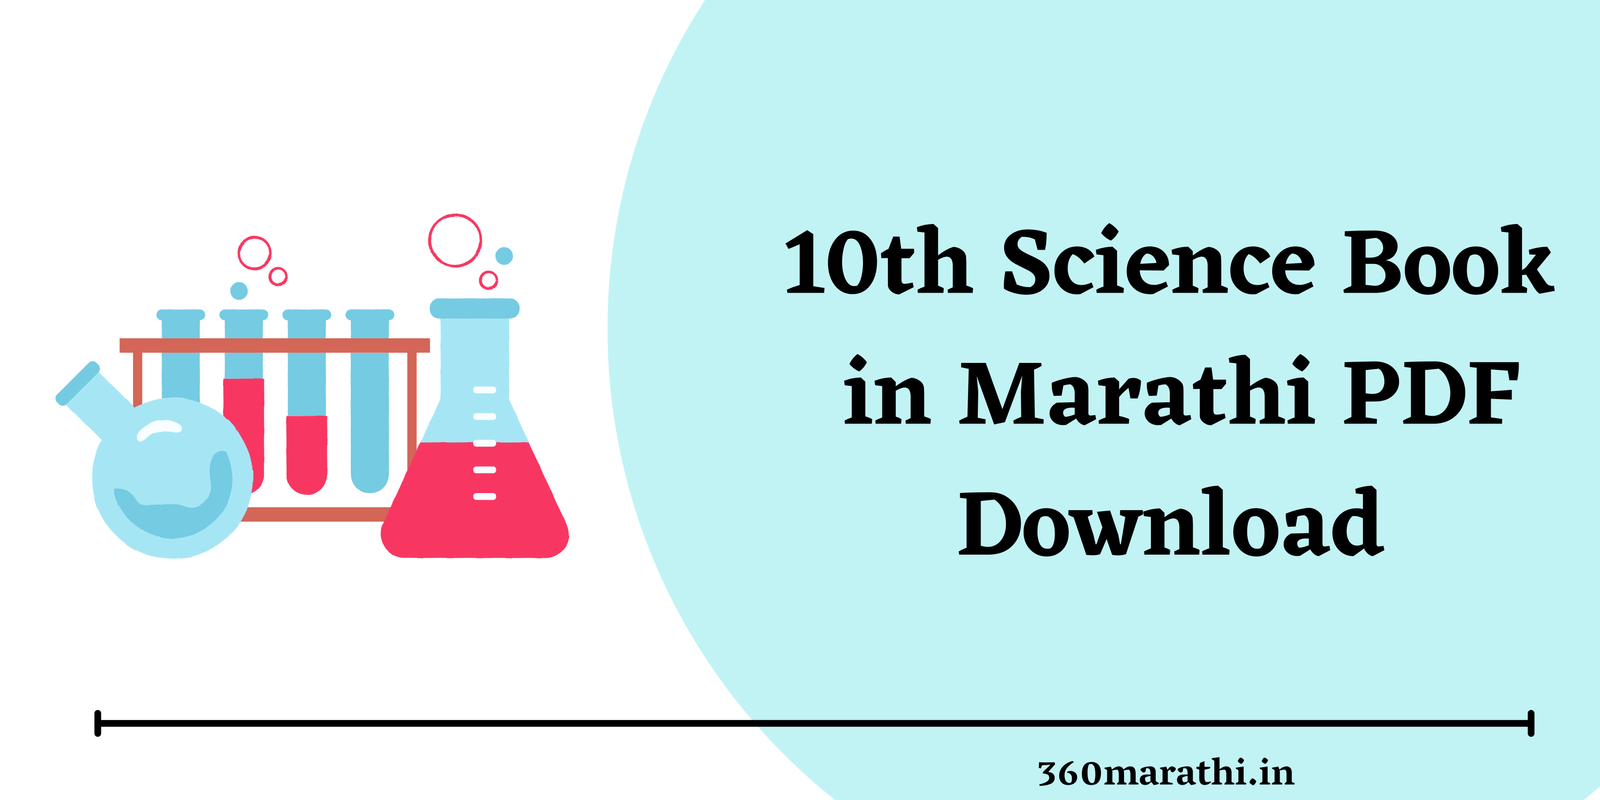 10th Science Book in Marathi PDF Download -